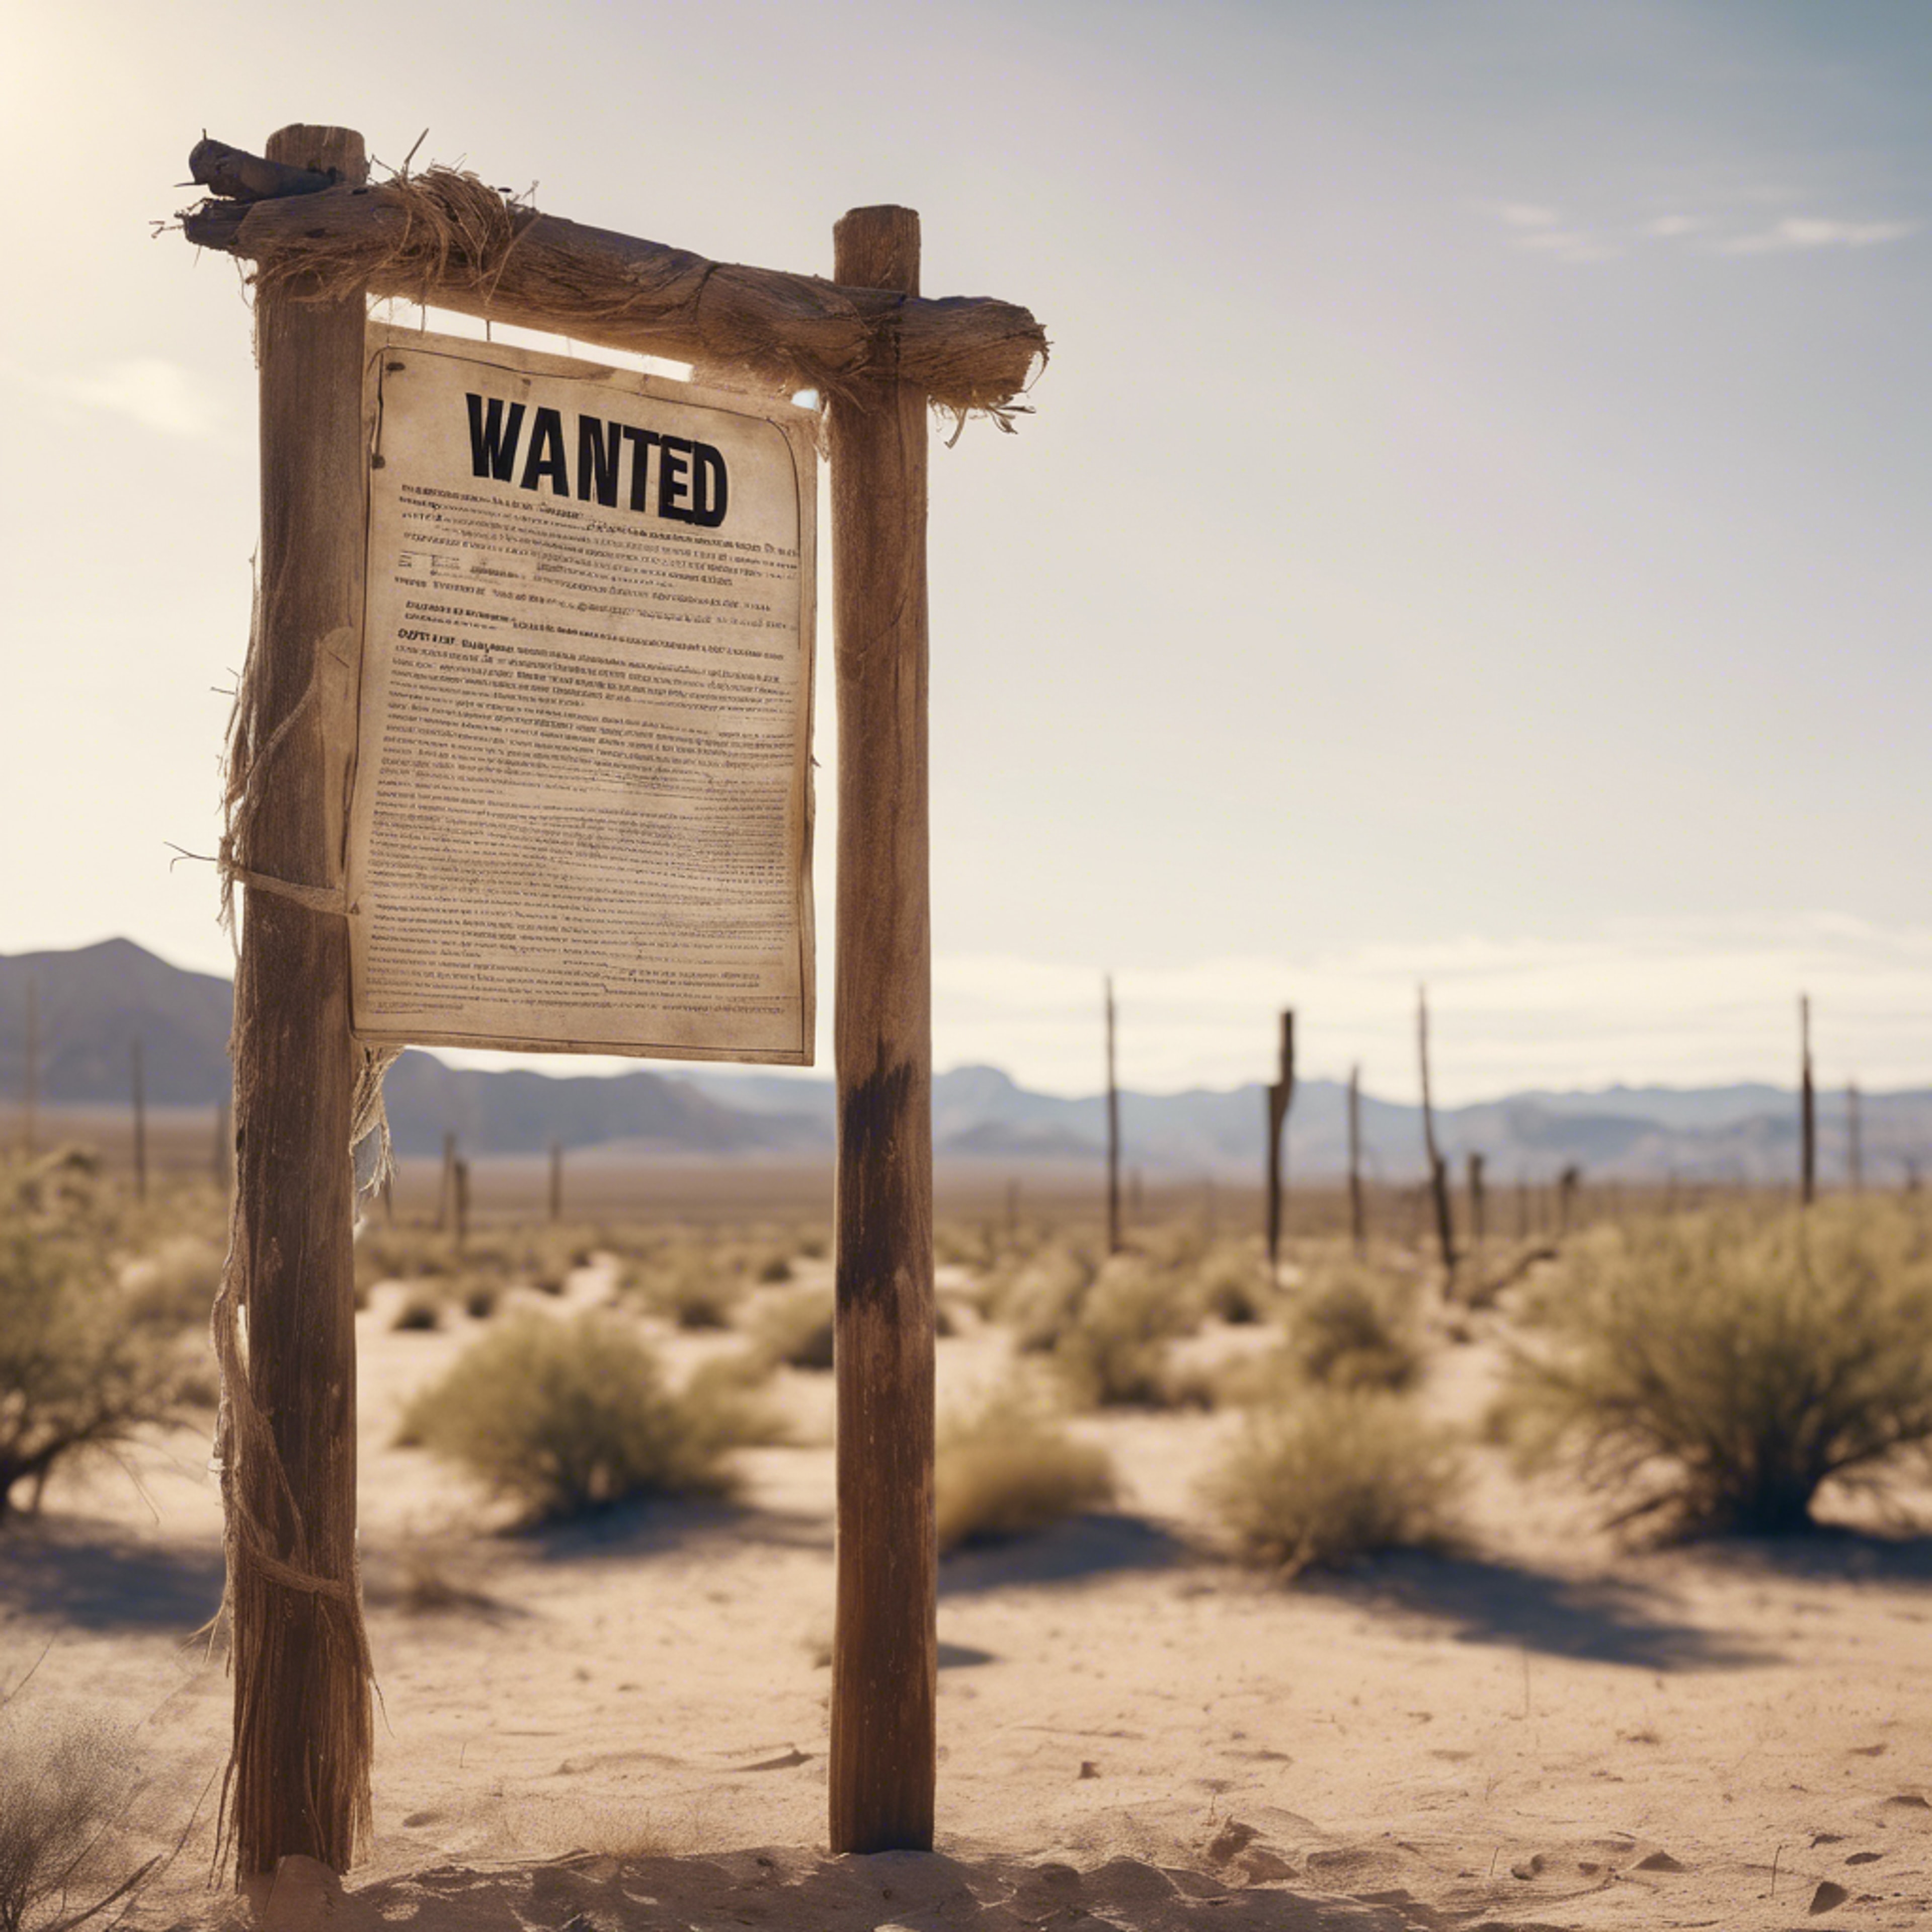 A wanted poster nailed to wooden post in a windy desert town, offering a reward in bold letters. Tapet[1e032392f4784d5094da]